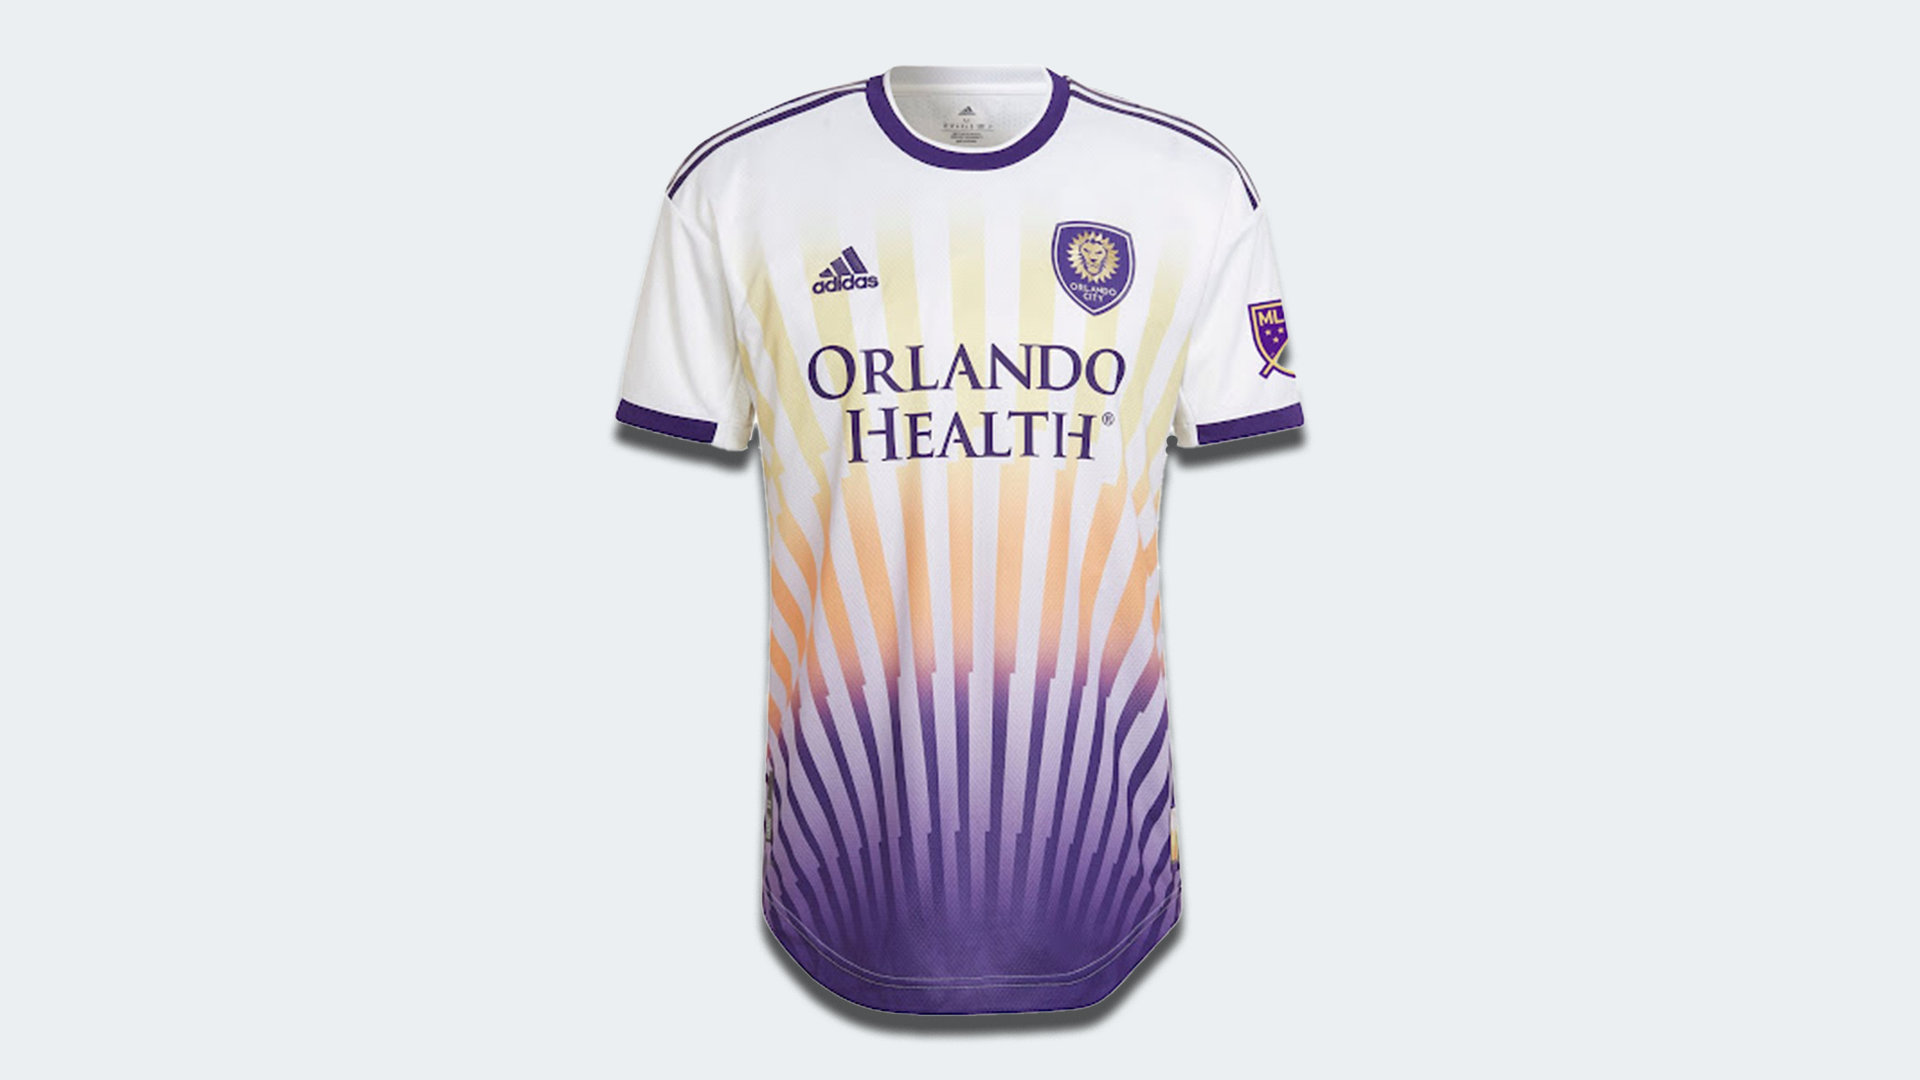 2023 MLS Kits: Ranking all 29 new releases from best to worst